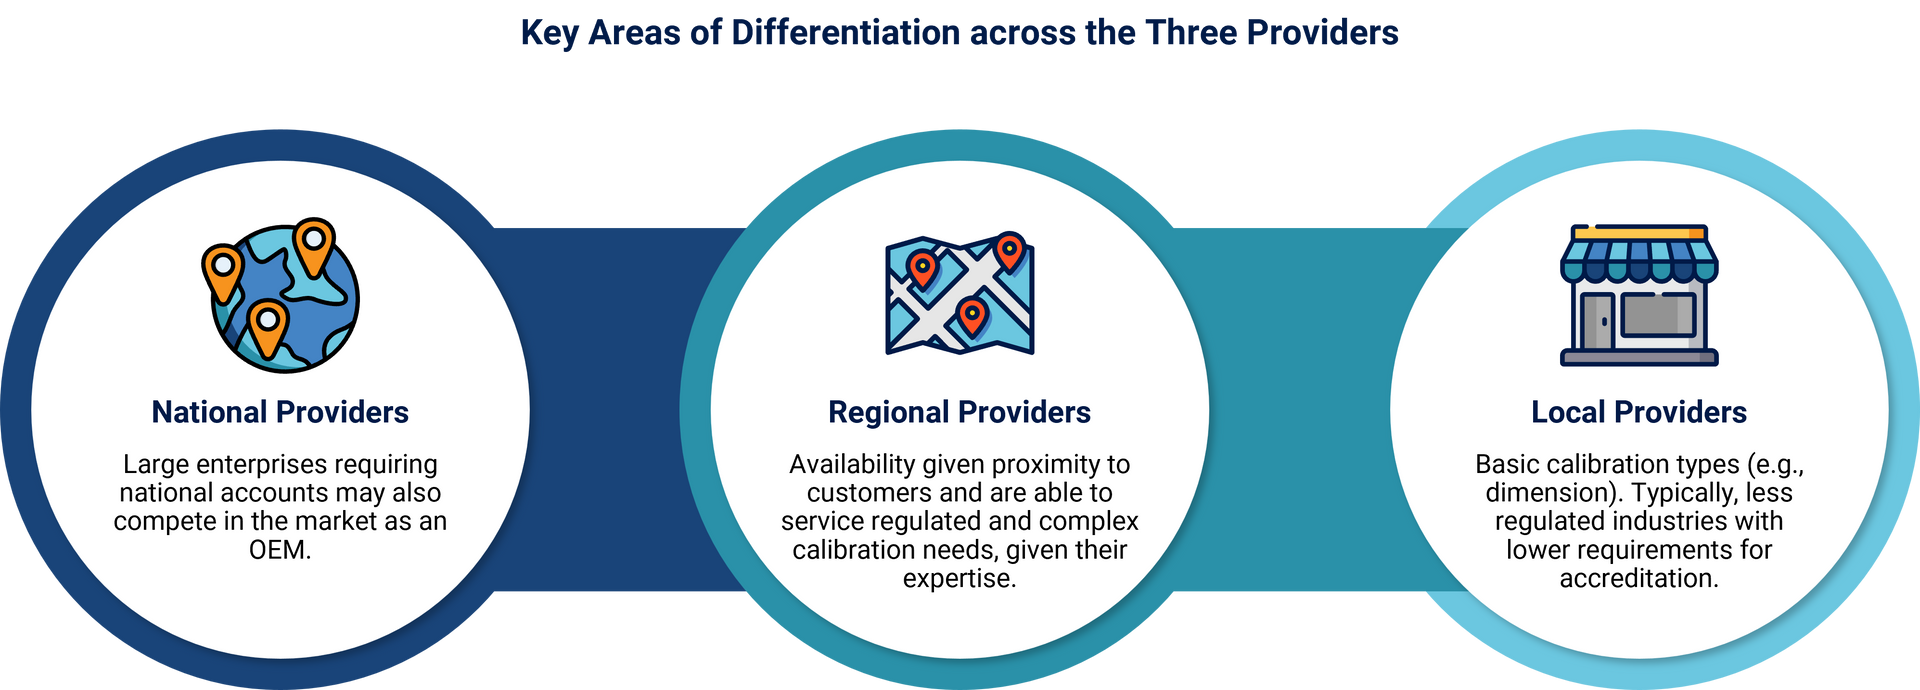 Key areas of differentiation across three providers